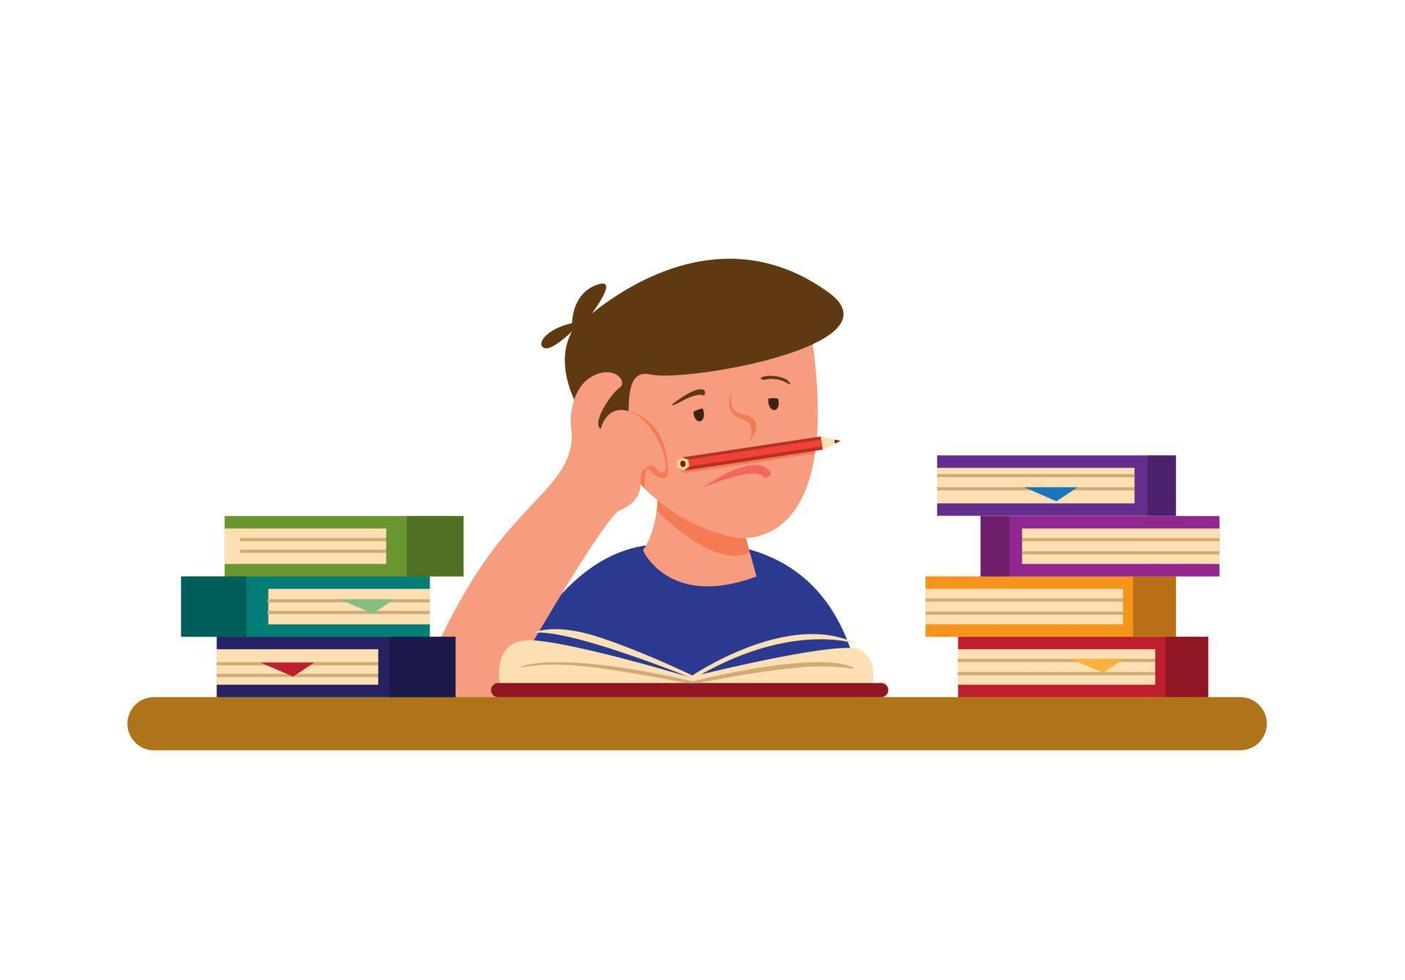 boy are bored and tired of reading book to learning, student reading and writing with stack of books cartoon flat illustration vector